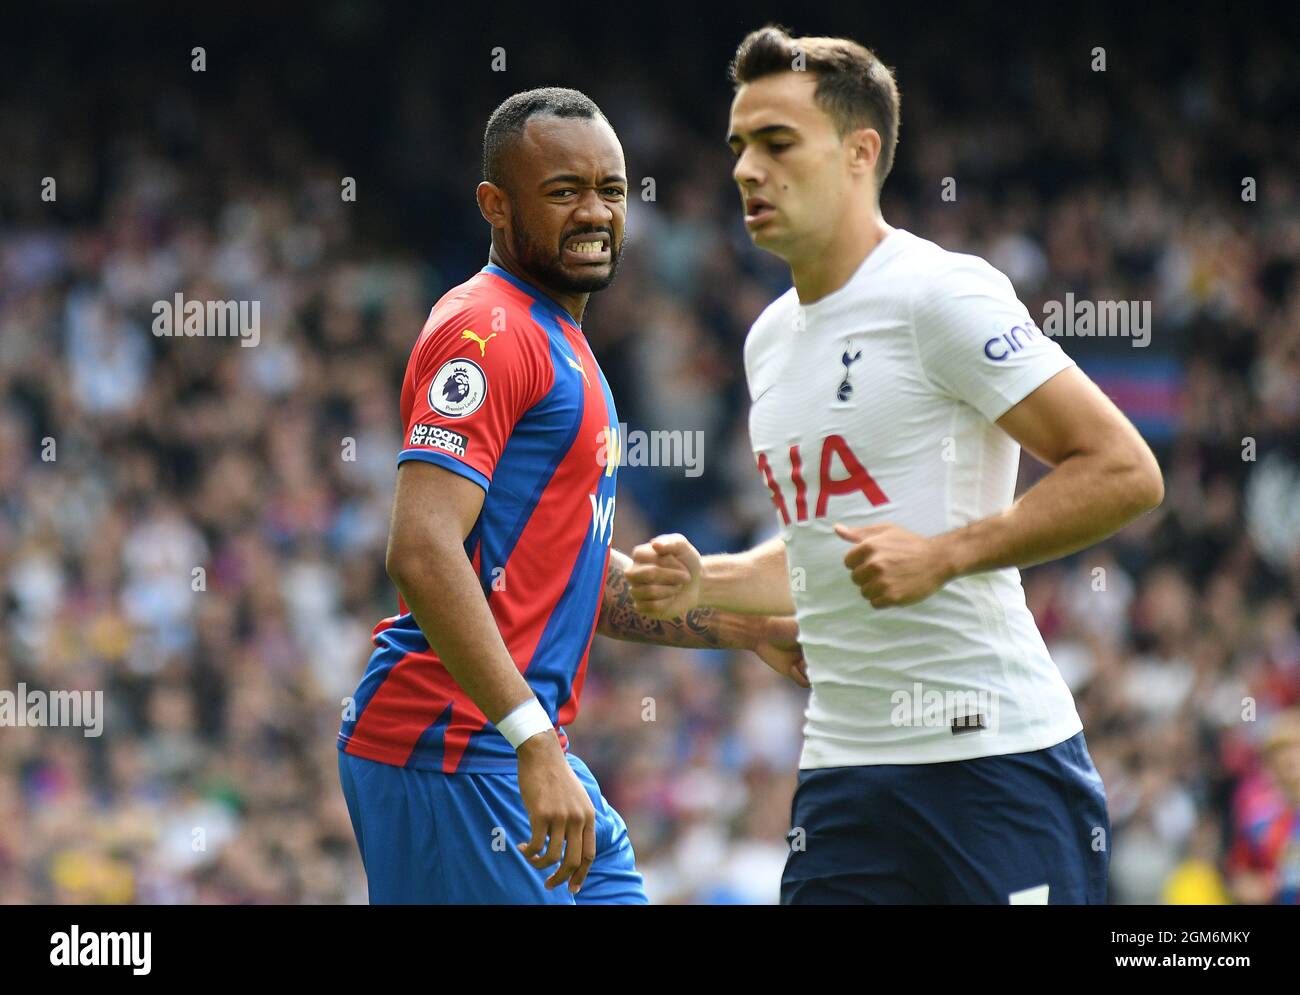 LONDON, ENGLAND - SEPTEMBER 11, 2021: Jordan Pierre Ayew of Palace pictured  during the 2021/22 Premier